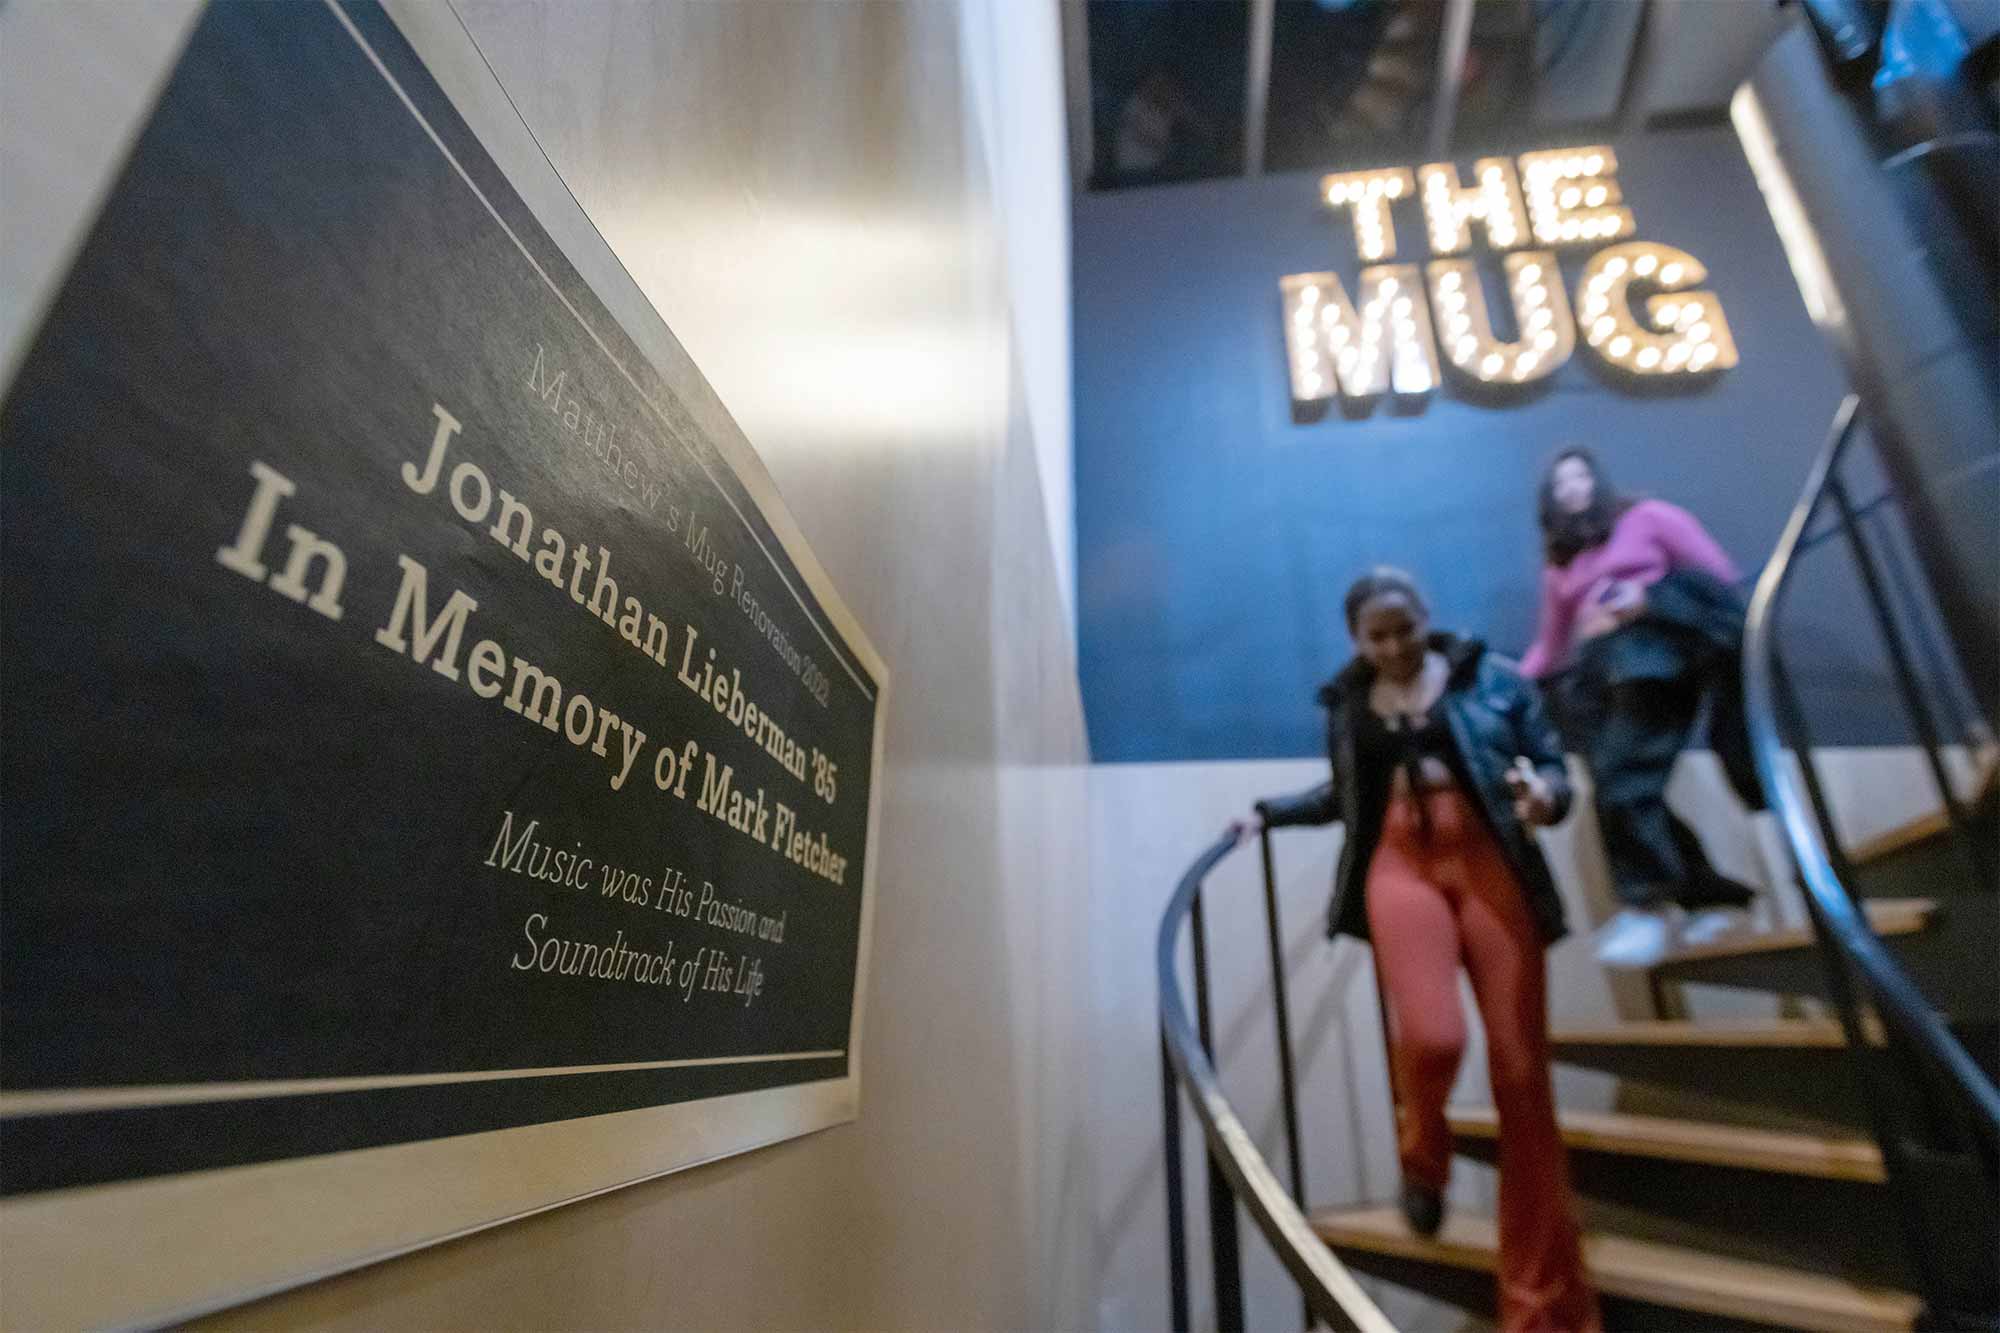 A closeup of a plaque that reads "Matthew's Mug Renovation 2022. Jonathan Lieberman ’85, In Memory of Mark Fletcher. Music was His Passion and Sountrack of His Life". In the background, two students descend a staircase under giant illuminated letters that read "The Mug".